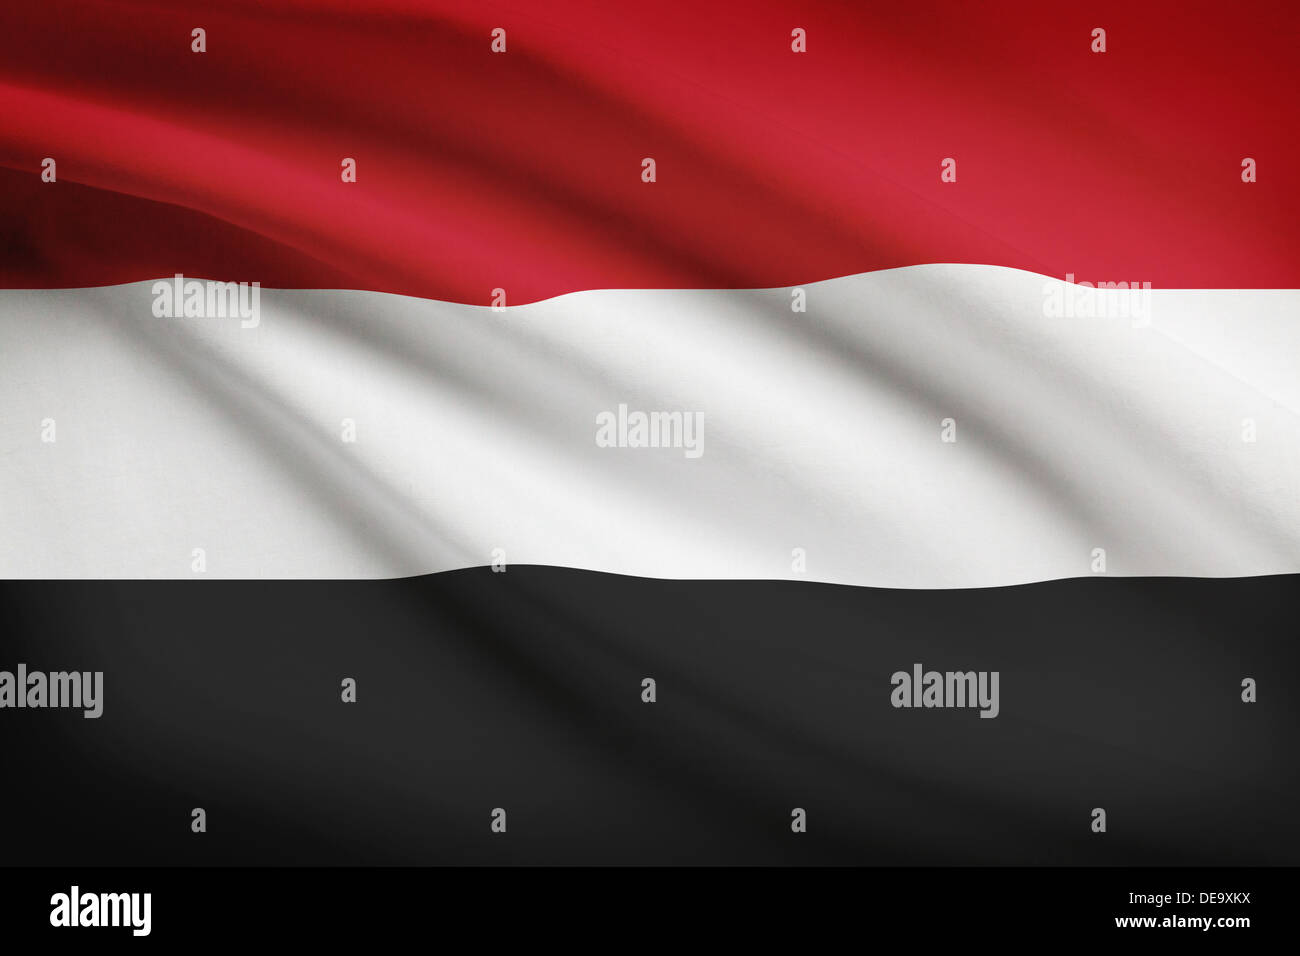 Yemeni flag blowing in the wind. Part of a series. Stock Photo